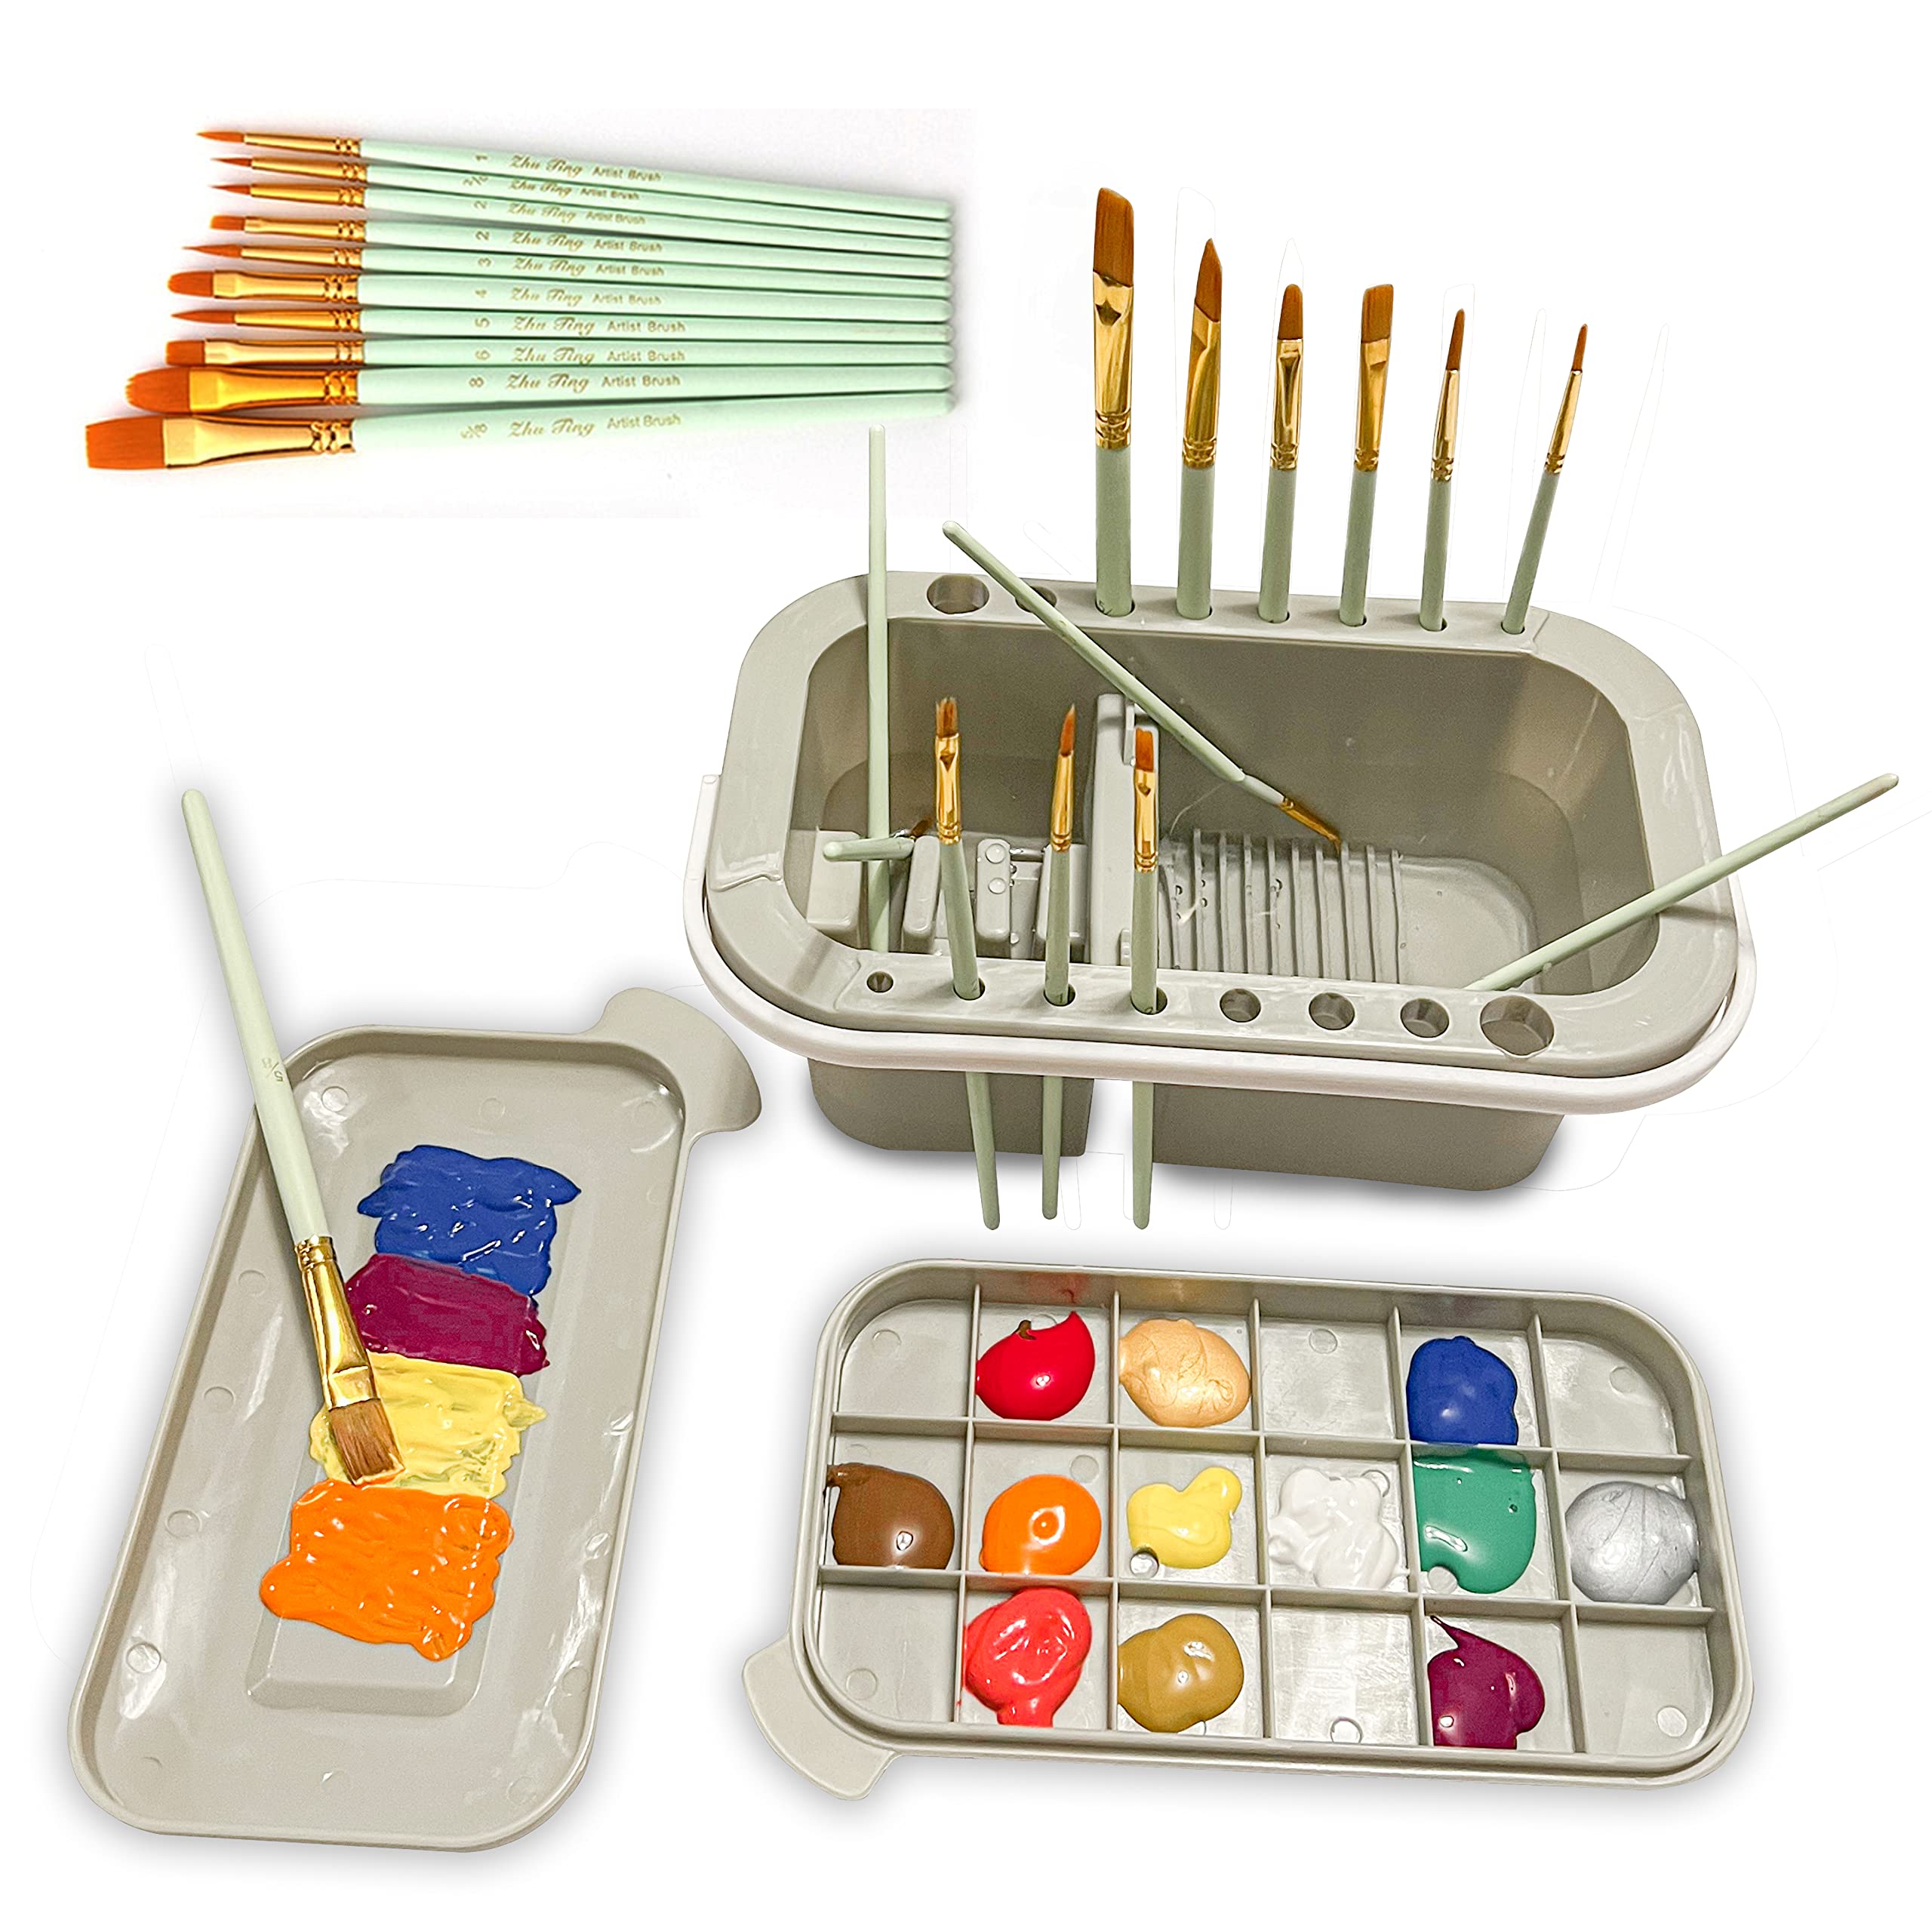 Simplify Asthetic Paint Palette - Paint Brush Cleaner with 10 Pieces Paint  Brushes - Paint Brush Holder and Organizers with Palette for Acrylic -  Brush Rinser for Watercolor and Water Based Paints